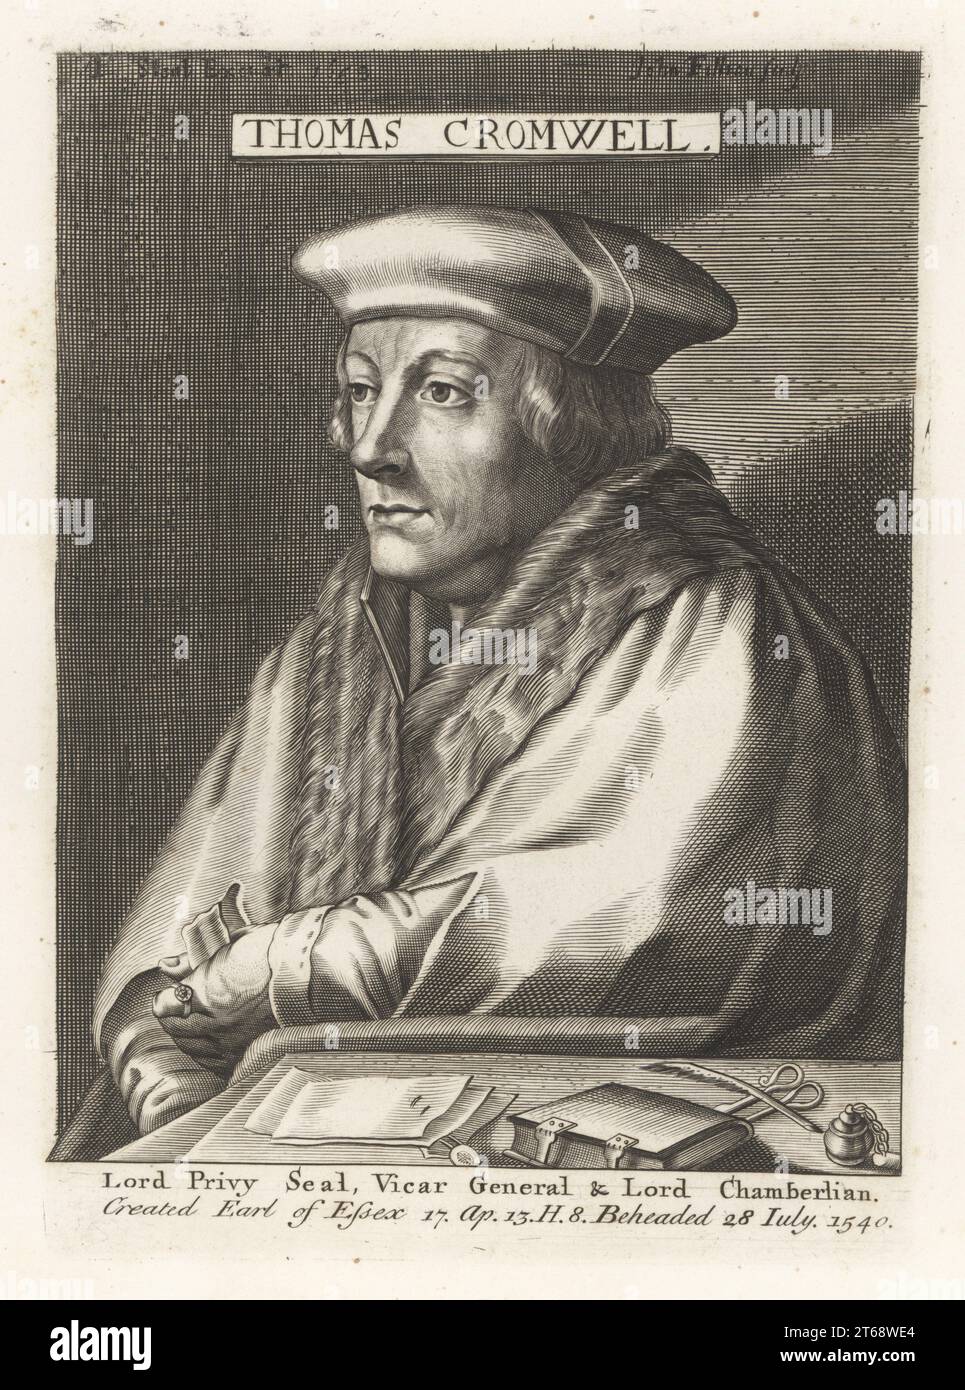 Thomas Cromwell, Earl of Essex, c.1485-1540. Lord Privy Seal, Vicar General and Lord Chamberlain to King Henry VIII of England. Beheaded 28 July 1540. At his desk with quill pen, papers, inkwell, book with clasps. Copperplate engraving by John Filian for Peter Stent after a portrait by Hans Holbein from Samuel Woodburns Gallery of Rare Portraits Consisting of Original Plates, George Jones, 102 St Martins Lane, London, 1816. Stock Photo